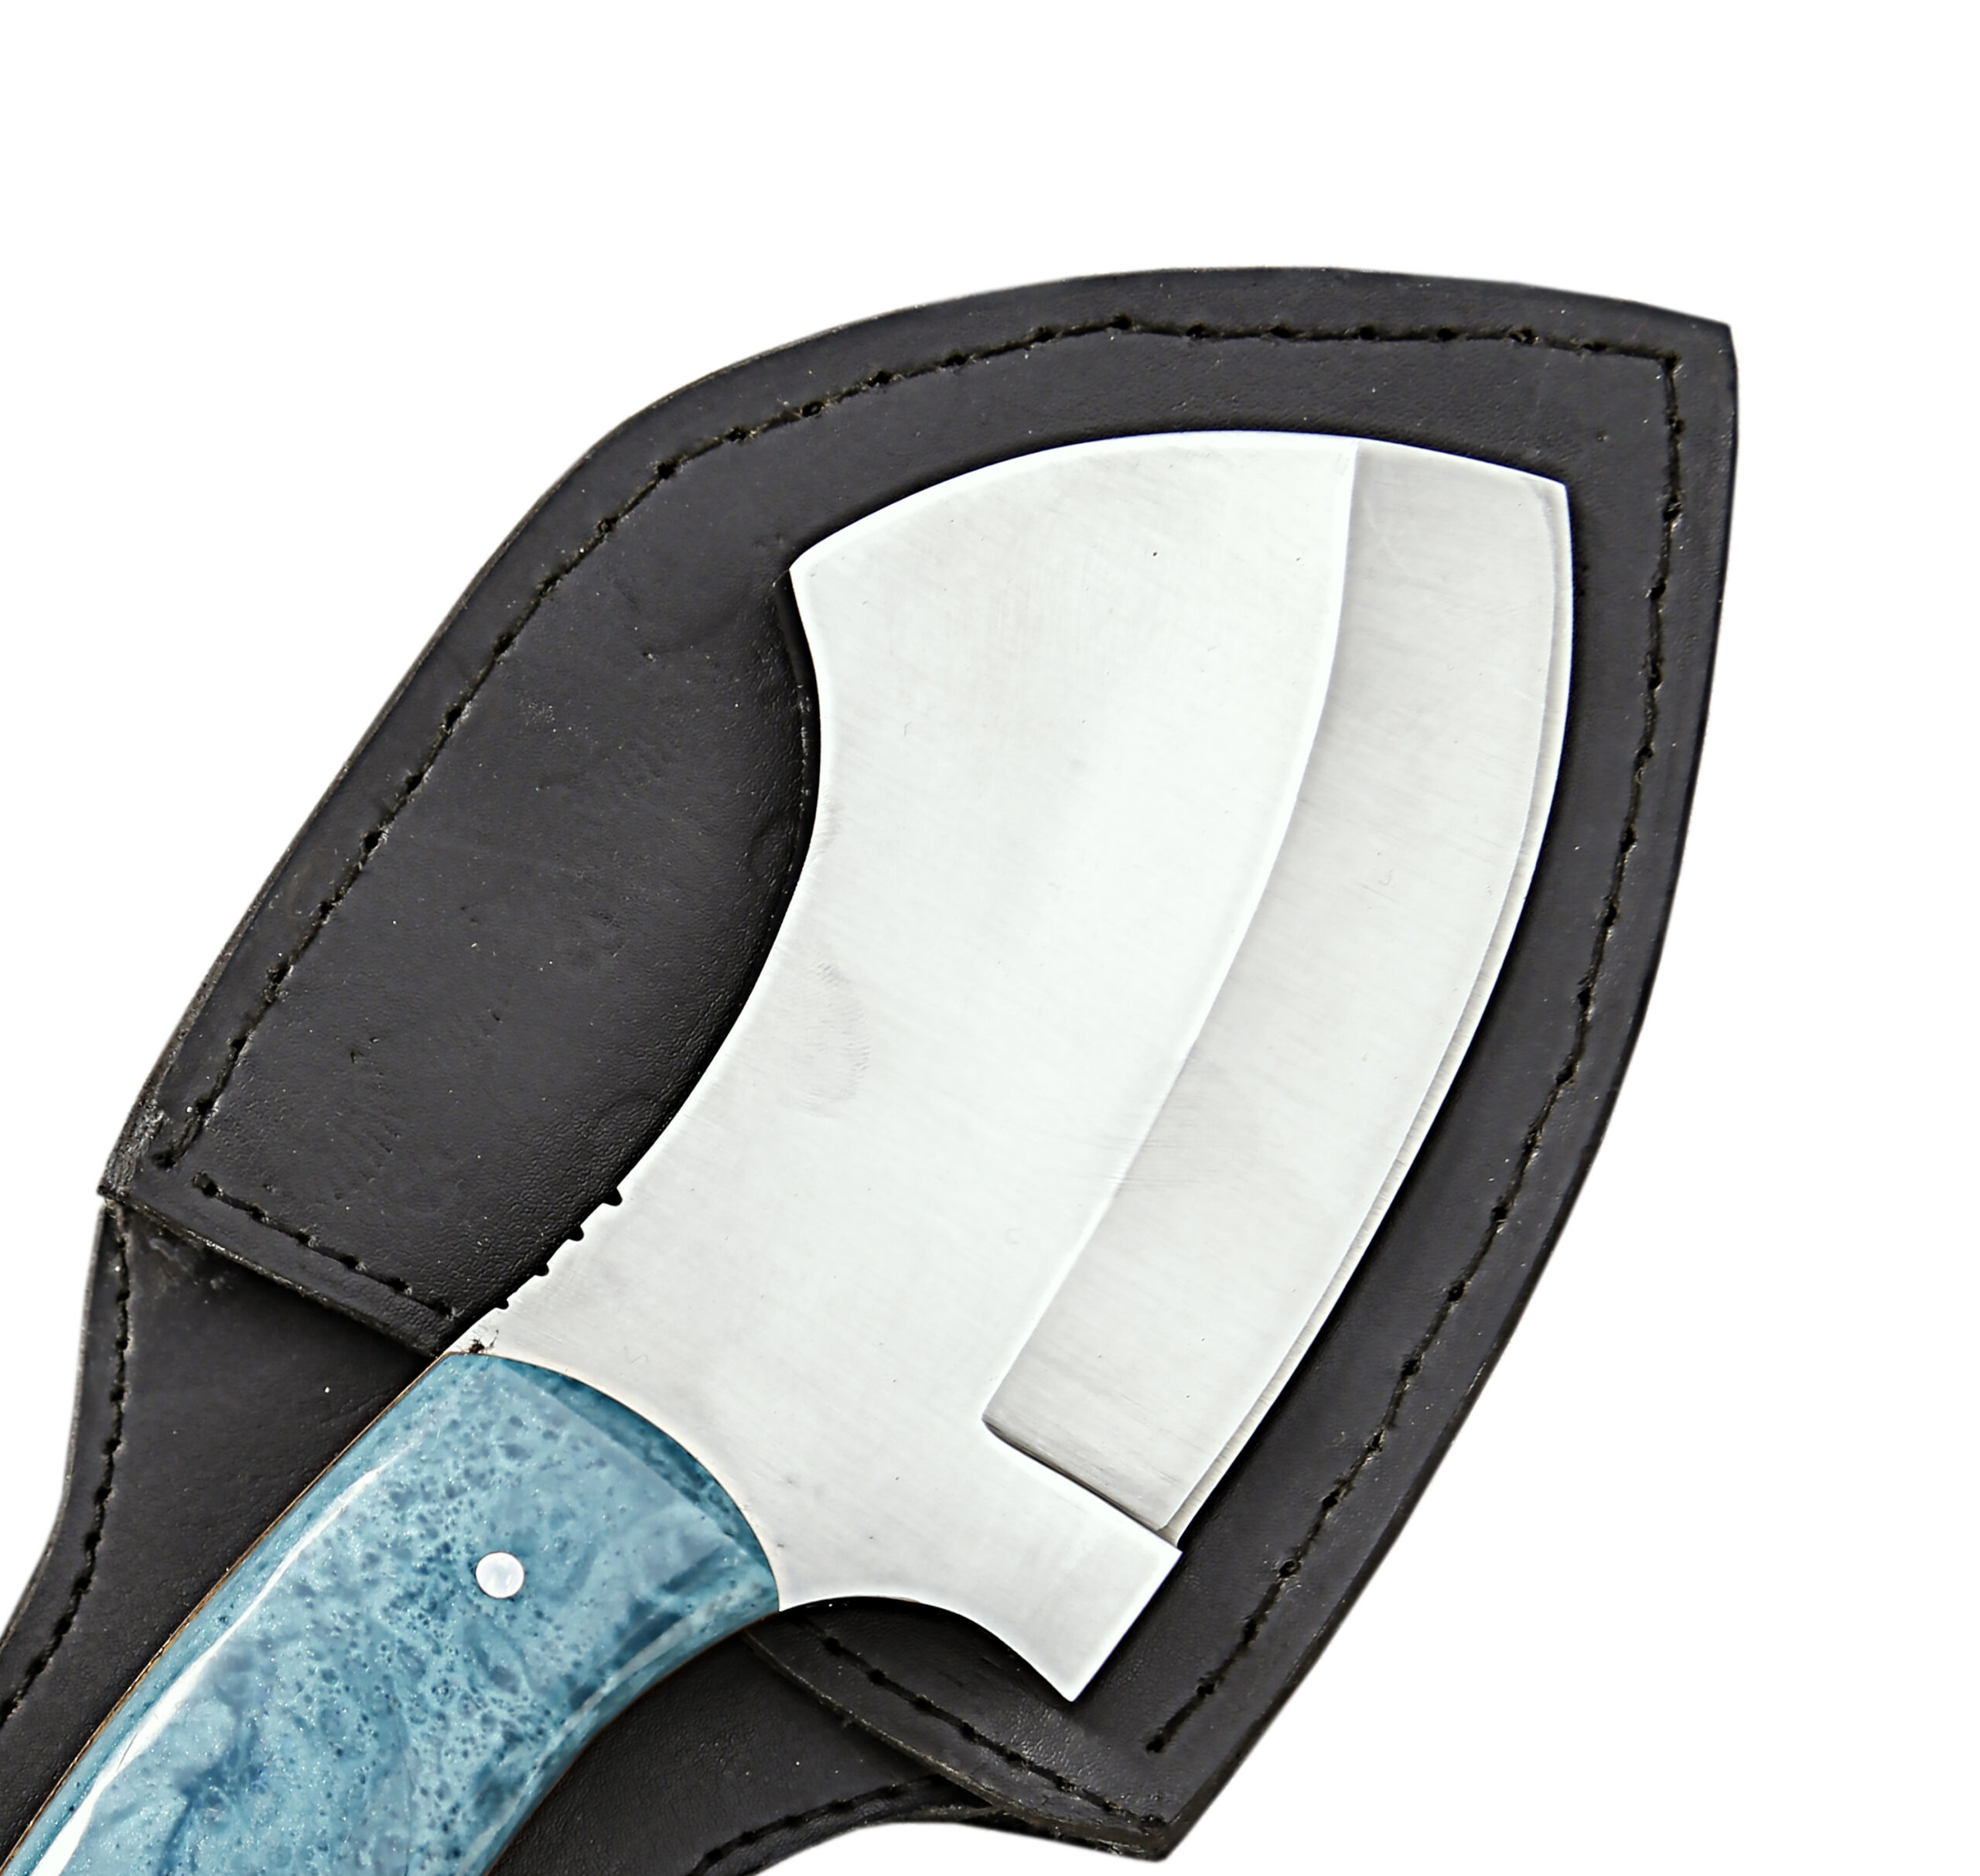 The Cordor: Cleaver Knife with Sheath (Spring Steel, D2 Steel are